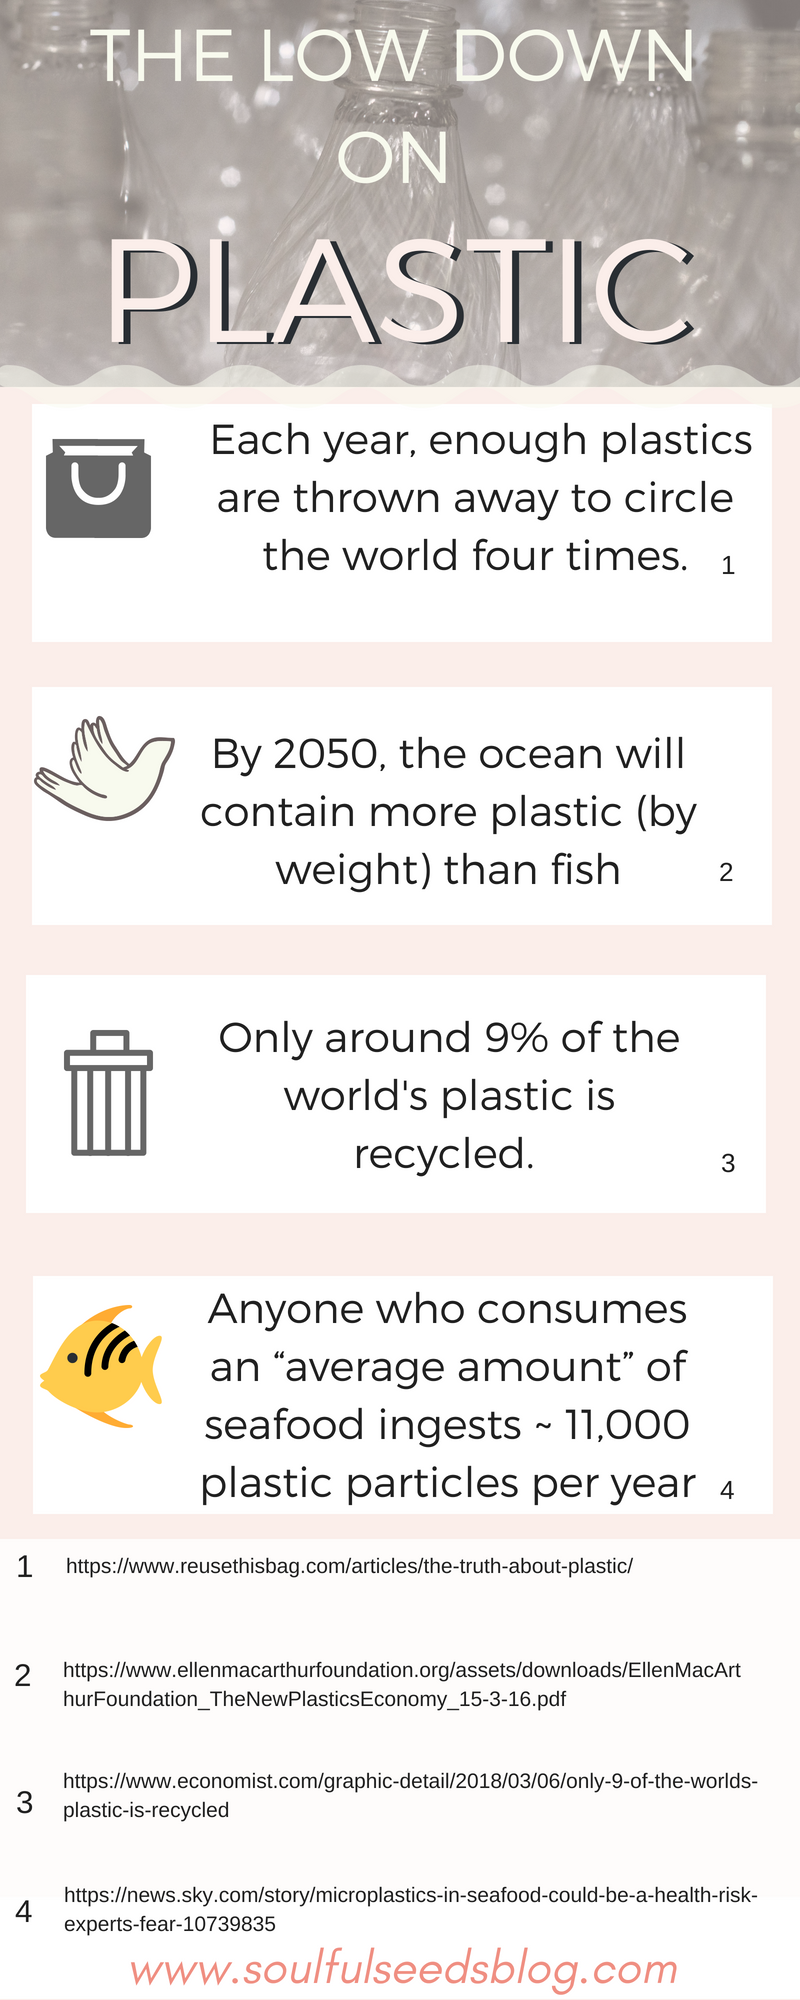 Check out why you should stop using single use plastic and go plastic free! Zero waste living or low impact living is surprisingly easy... check out plastic facts that will convince you to give up plastic!